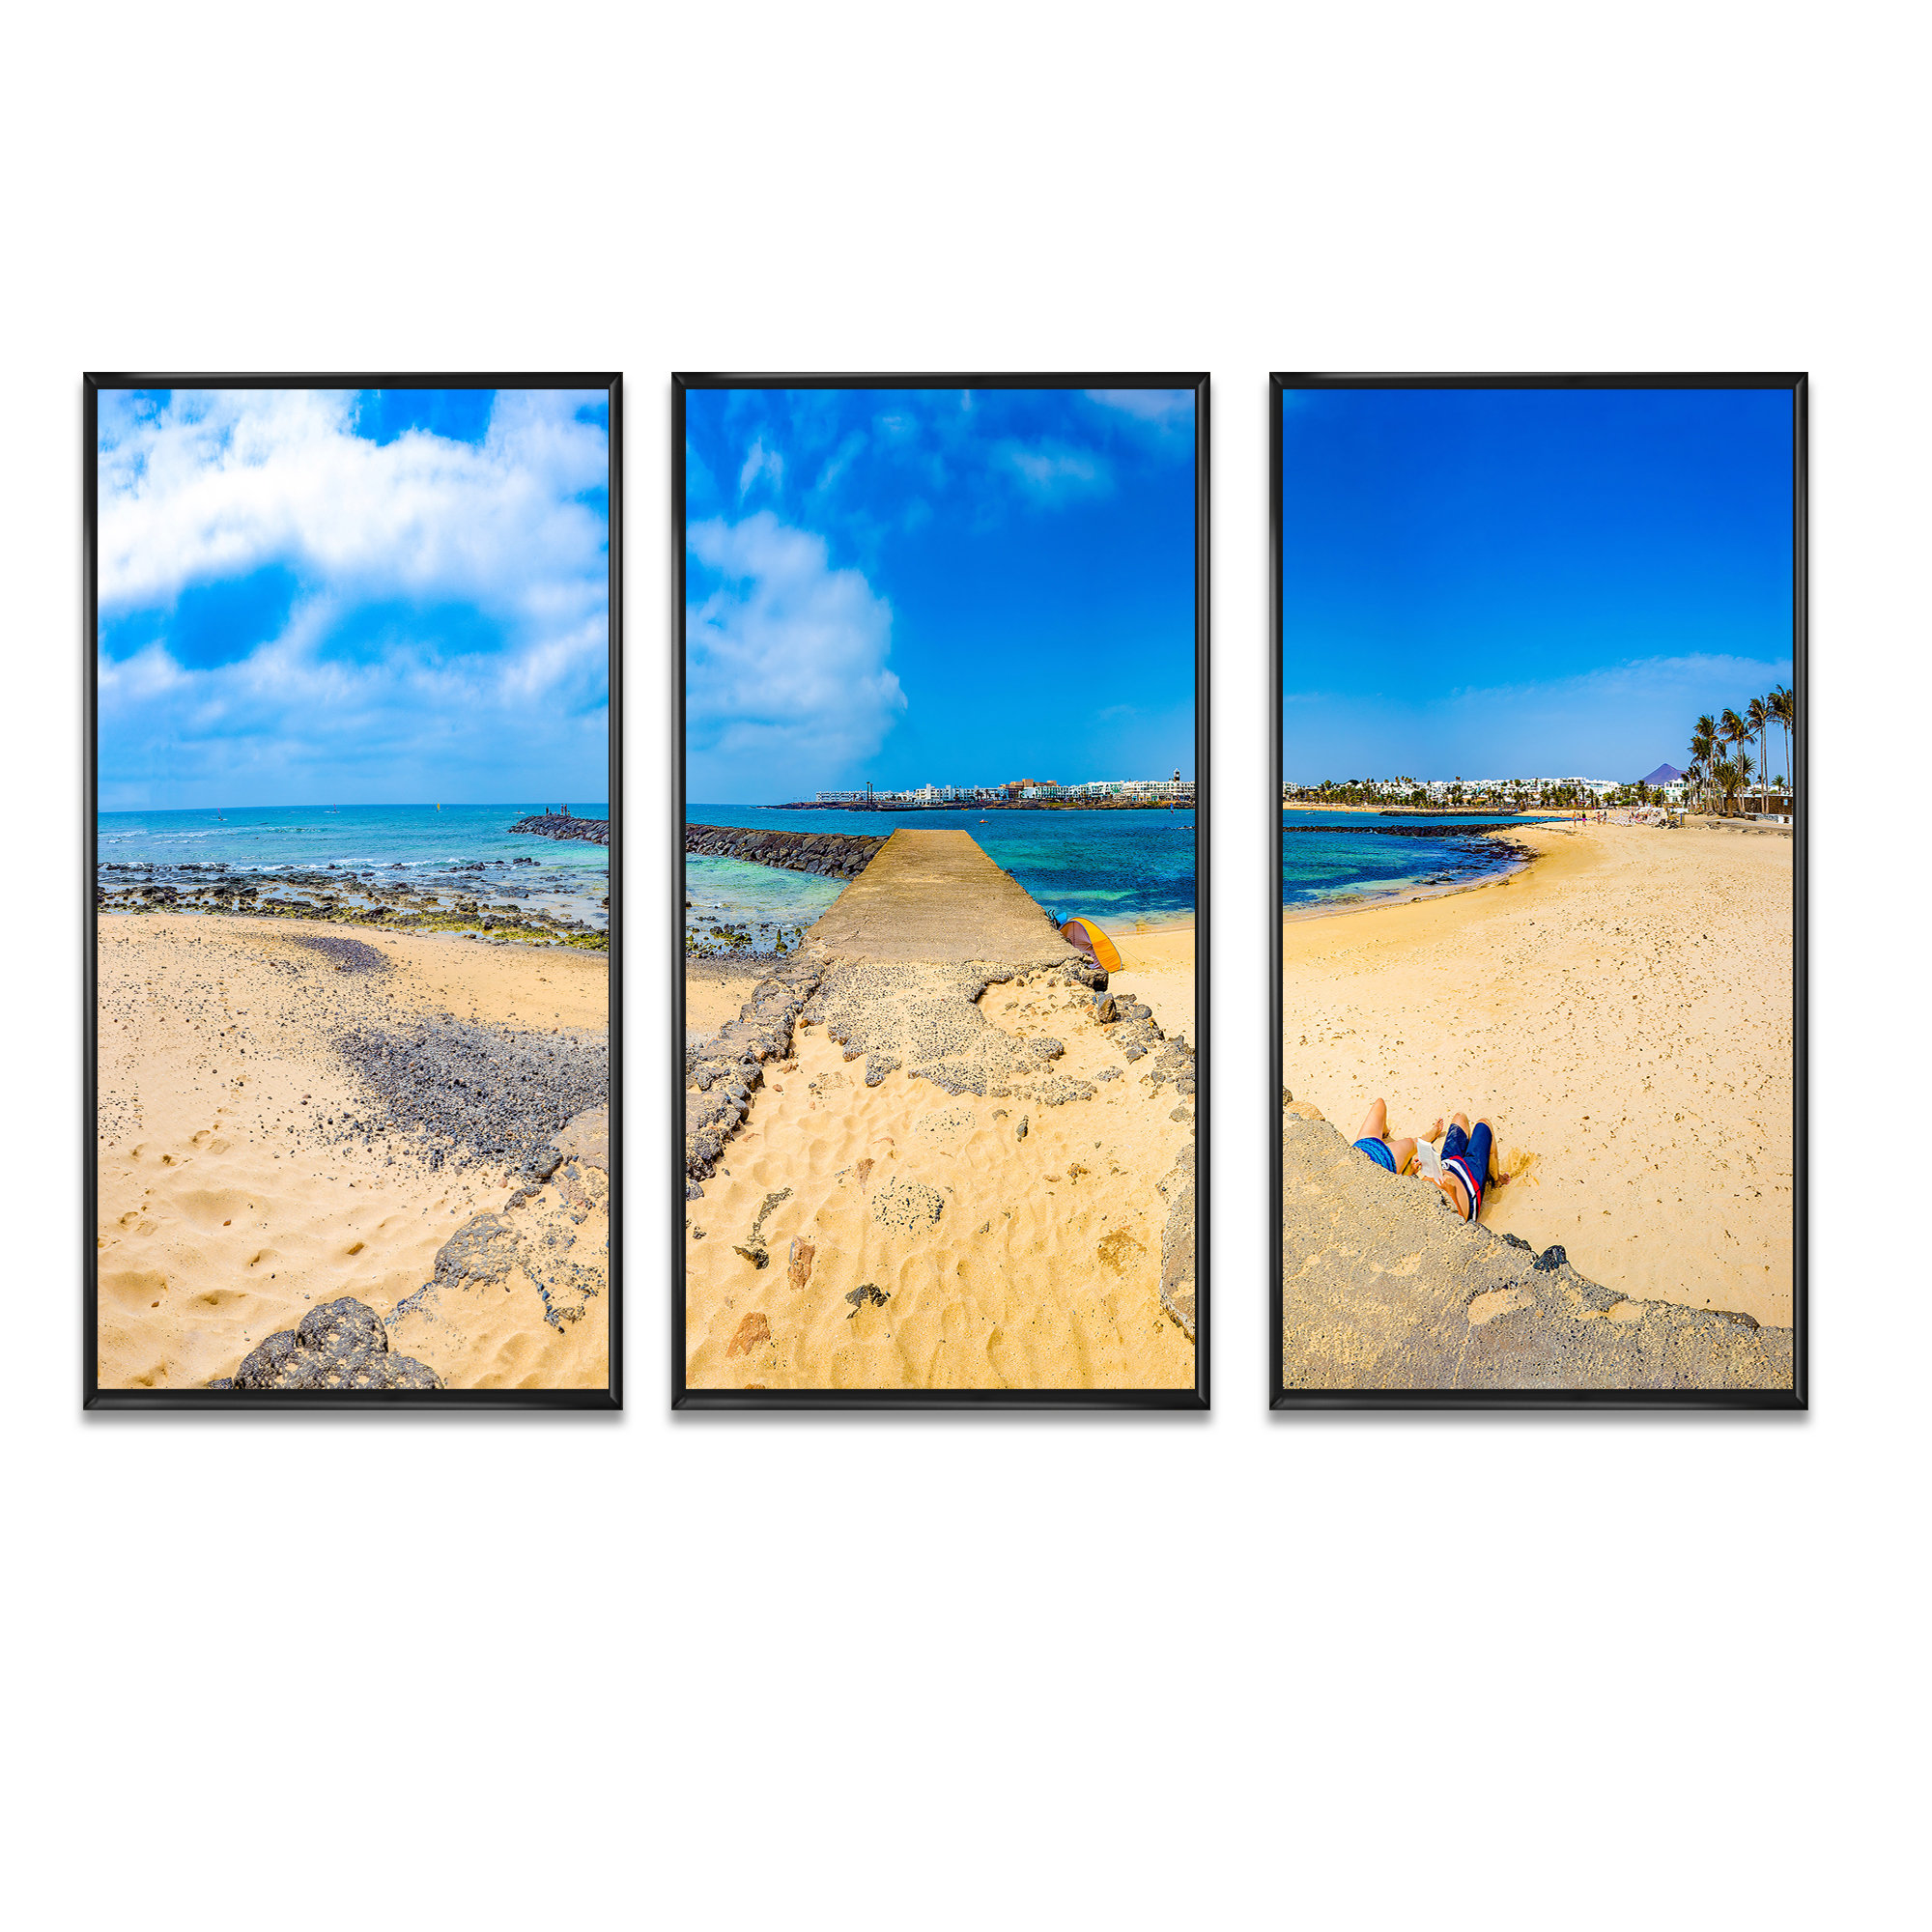 Spanish Beach View Landscape in Lanzarote - 3 Piece Picture Frame Print On Canvas Highland Dunes Format: Black Framed, Size: 20 H x 36 W x 1 D